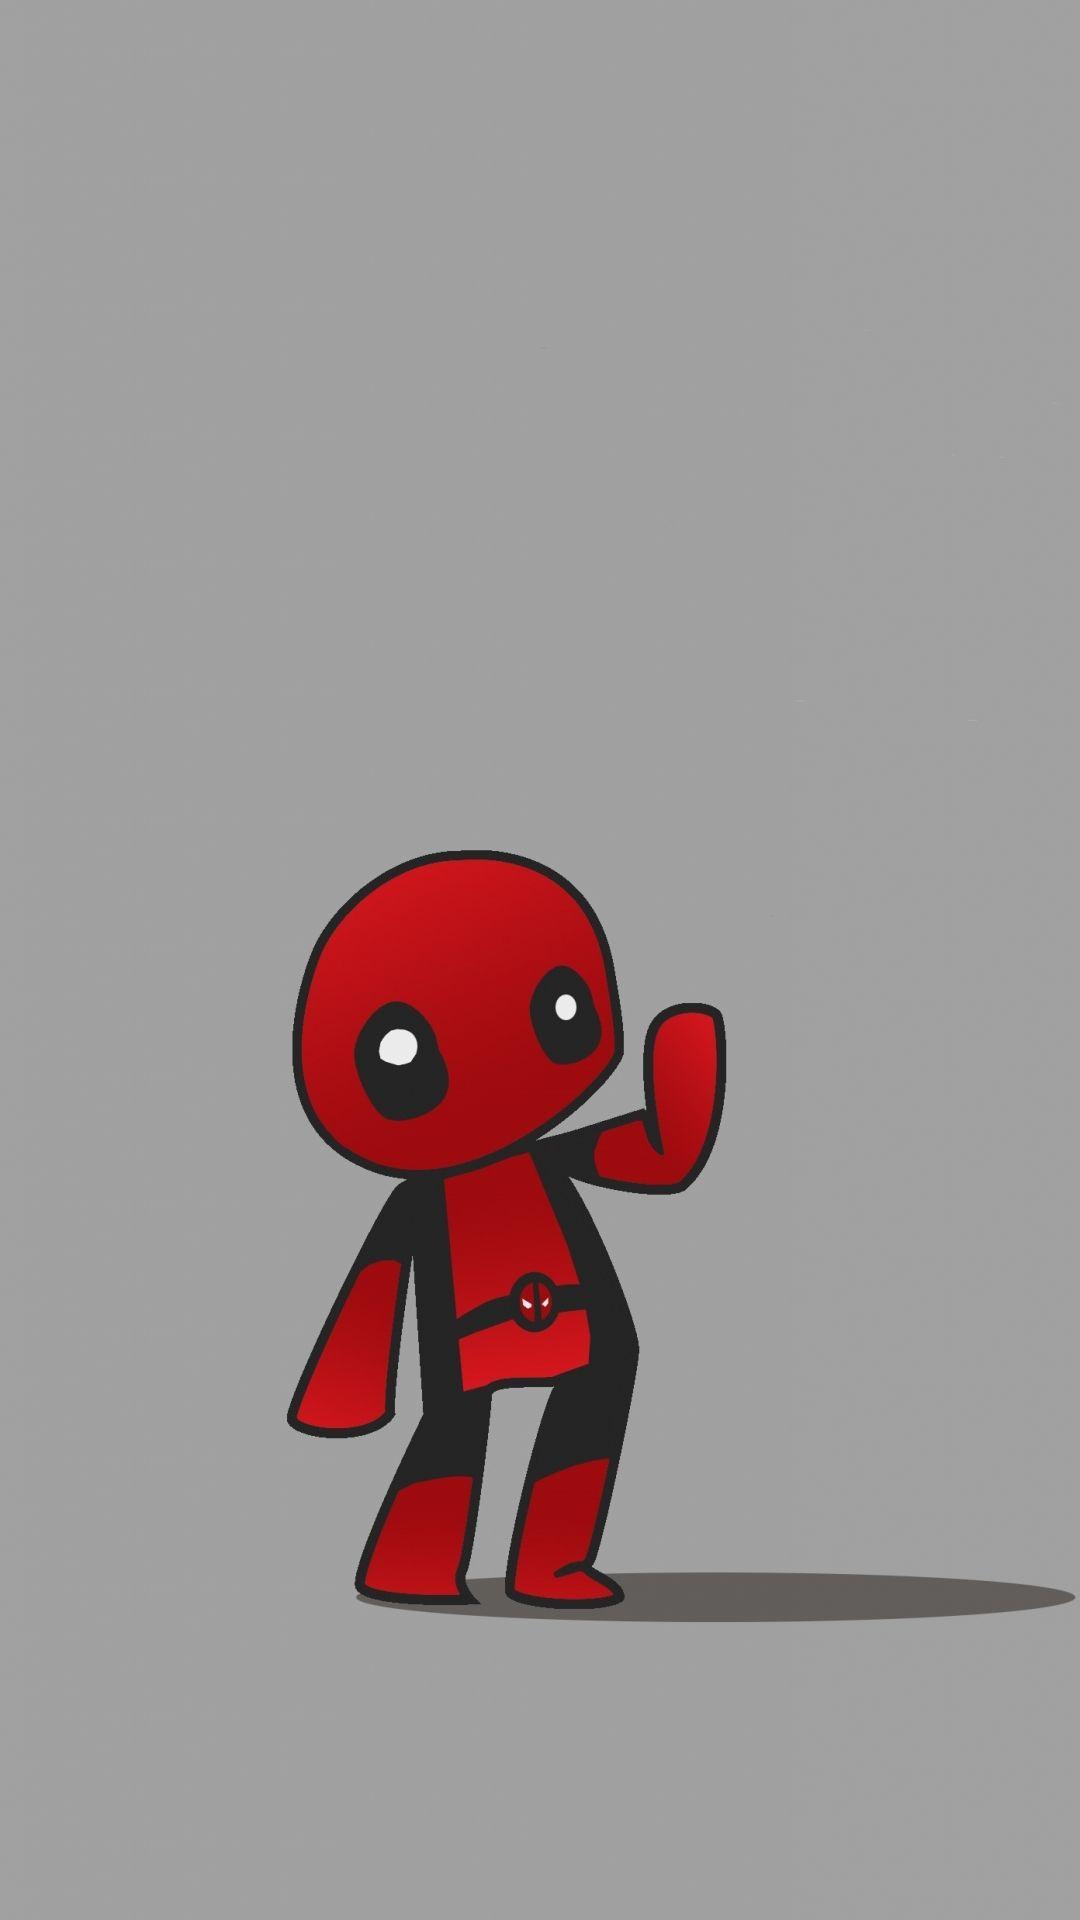 Deadpool Iphone Wallpapers Top Free Deadpool Iphone Backgrounds Wallpaperaccess